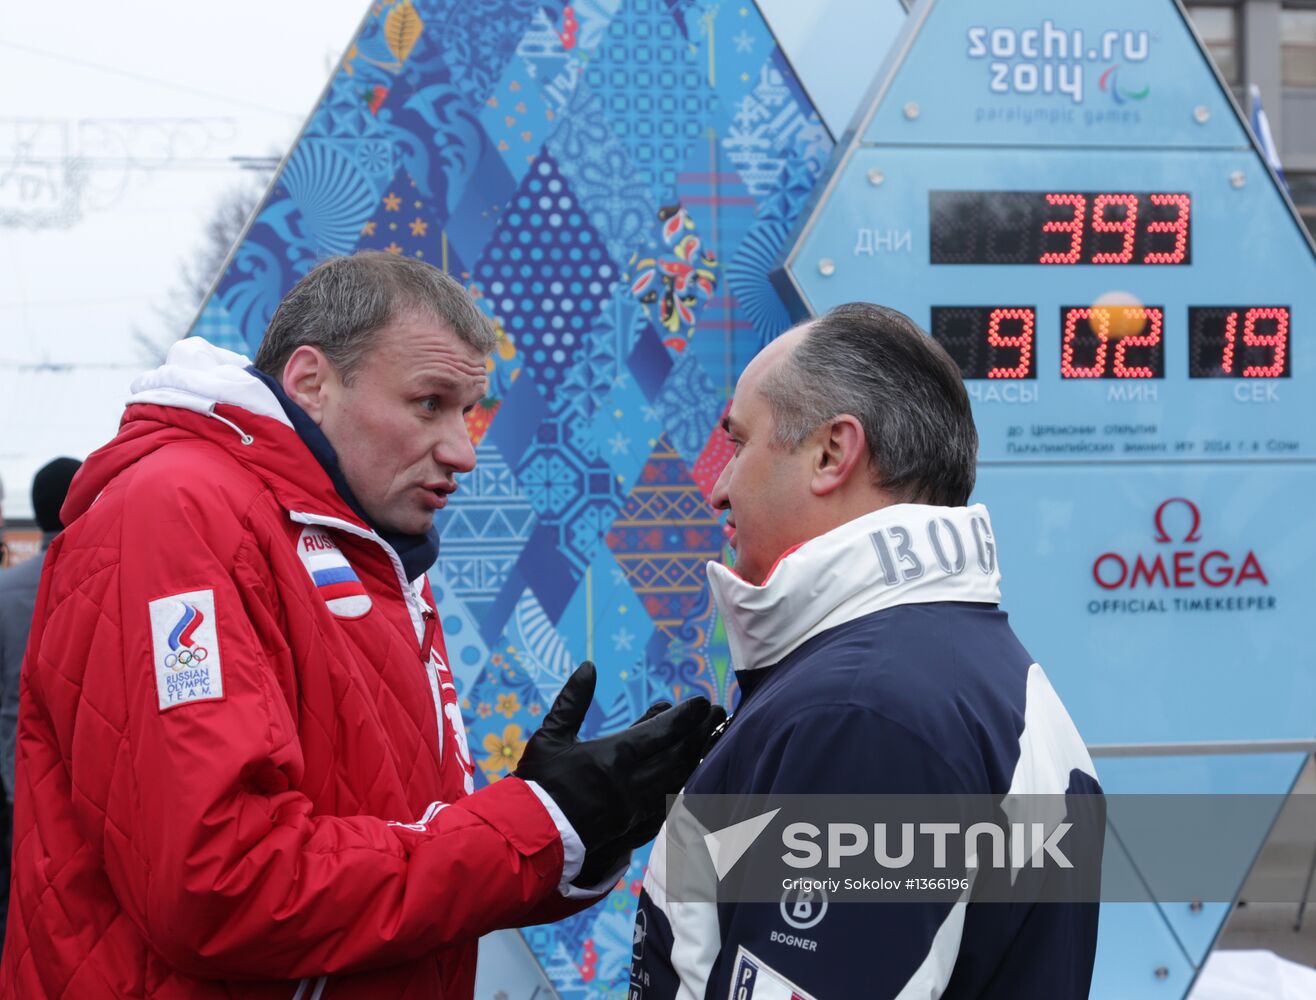 2014 Olympics countdown clock launched